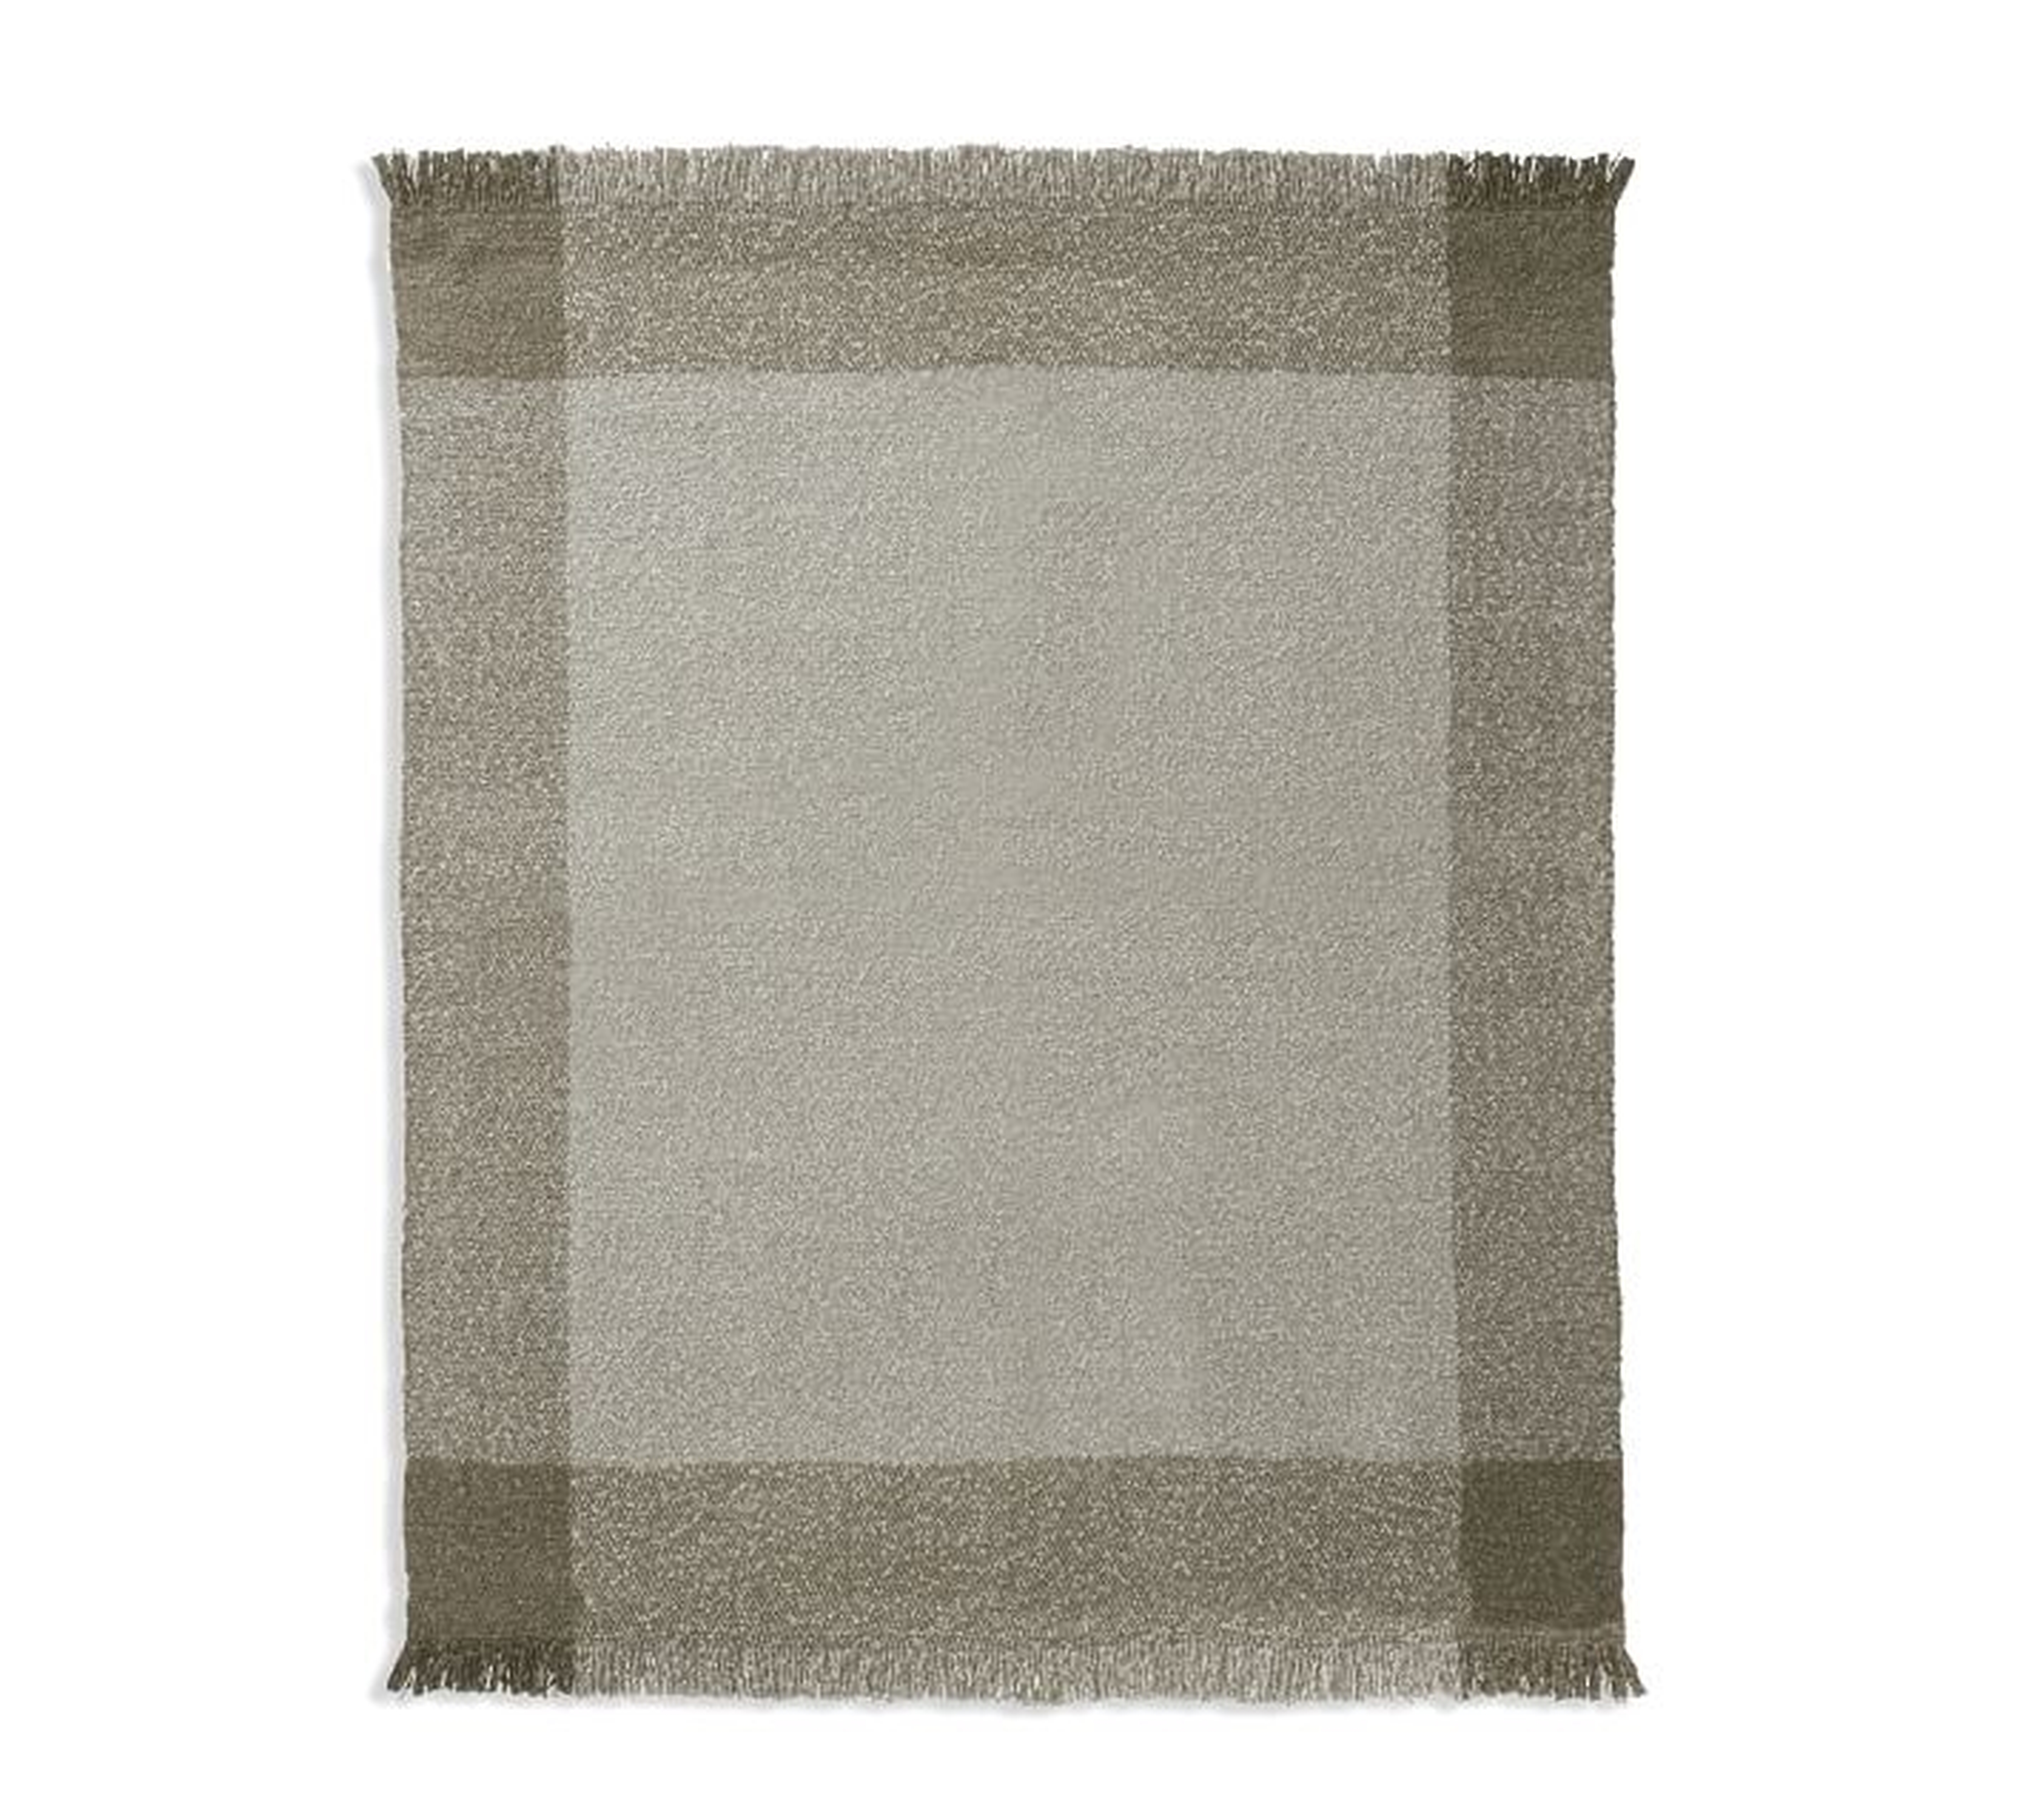 Heathered Boucle Personalized Throw, Sage, 50" x 60" - Pottery Barn